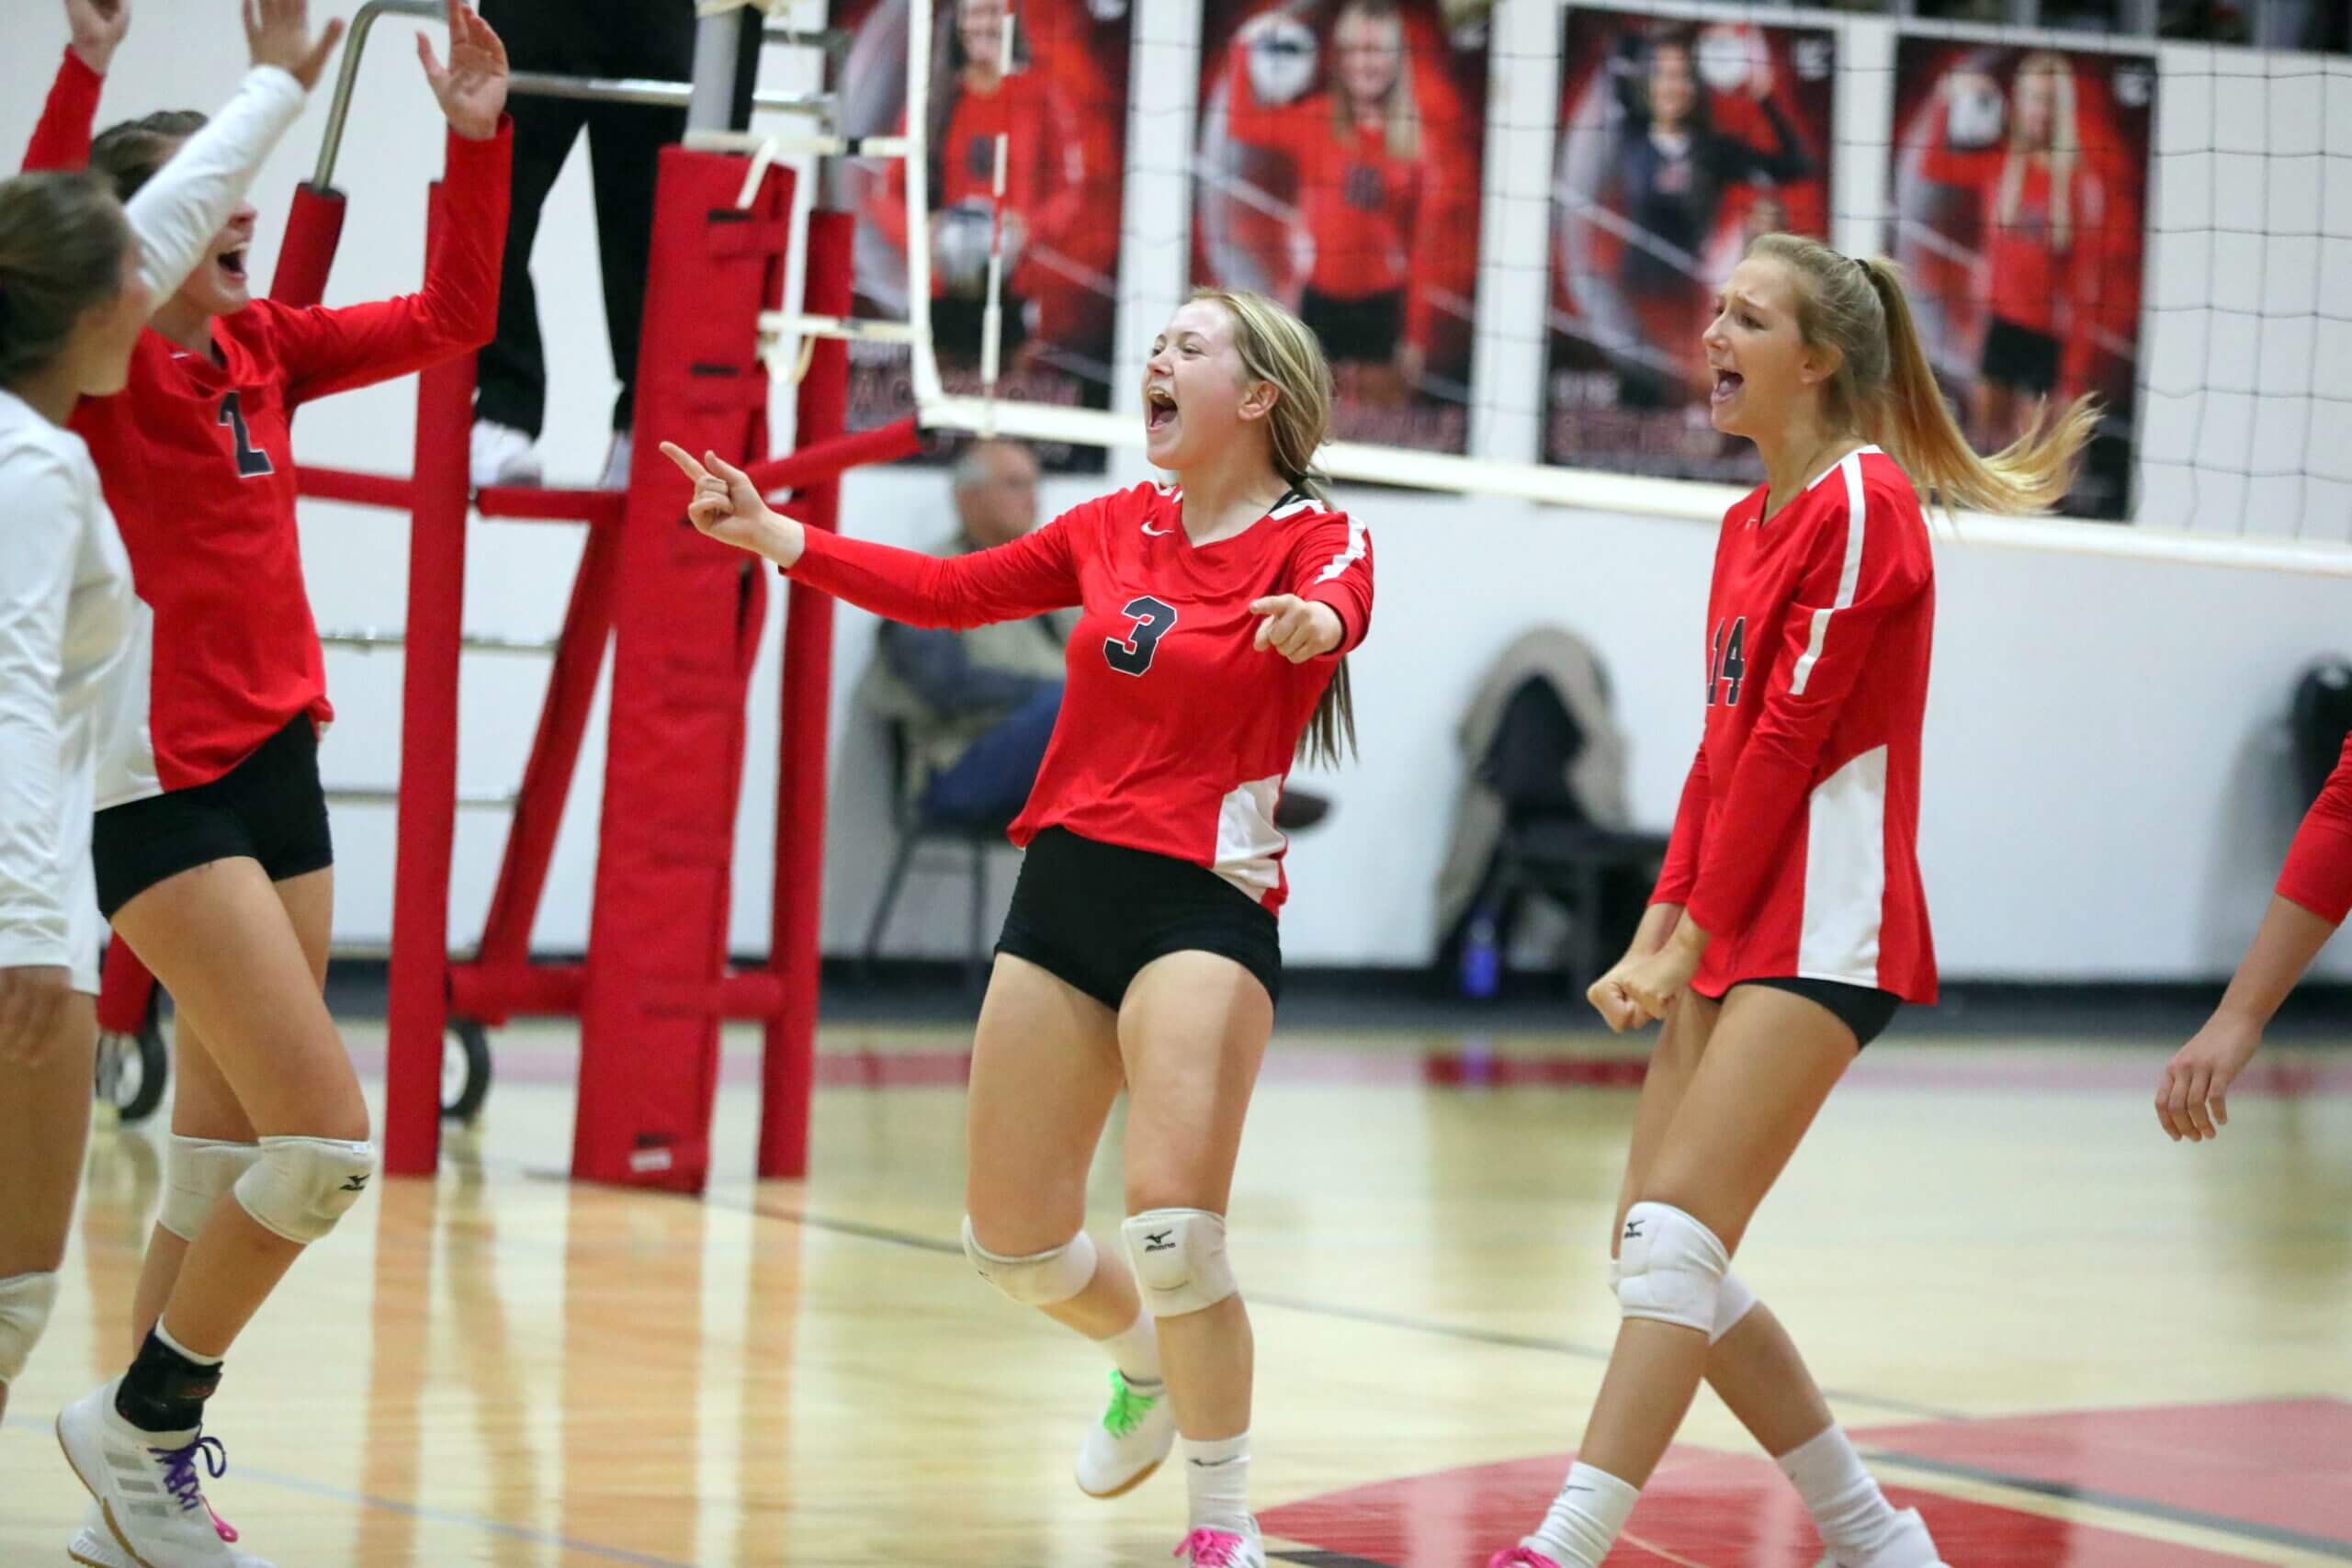 Walnut sweeps through Region play to claim top seed as they look to defend state title